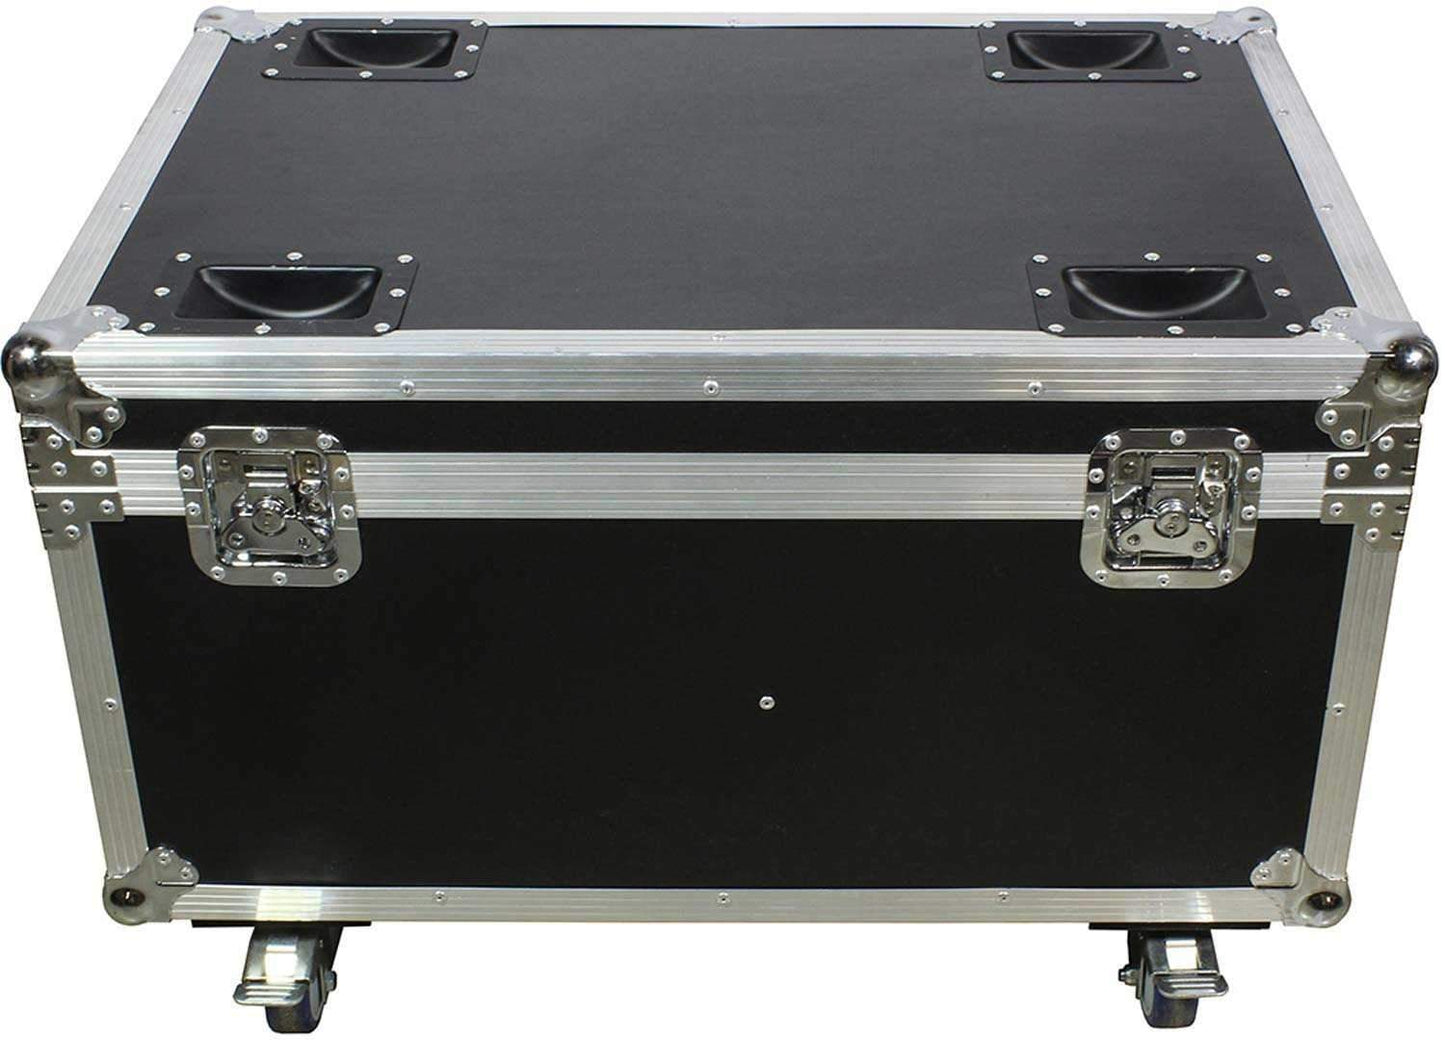 Blizzard Skybox Case 8 Rolling Case For 8 Skybox5 - ProSound and Stage Lighting